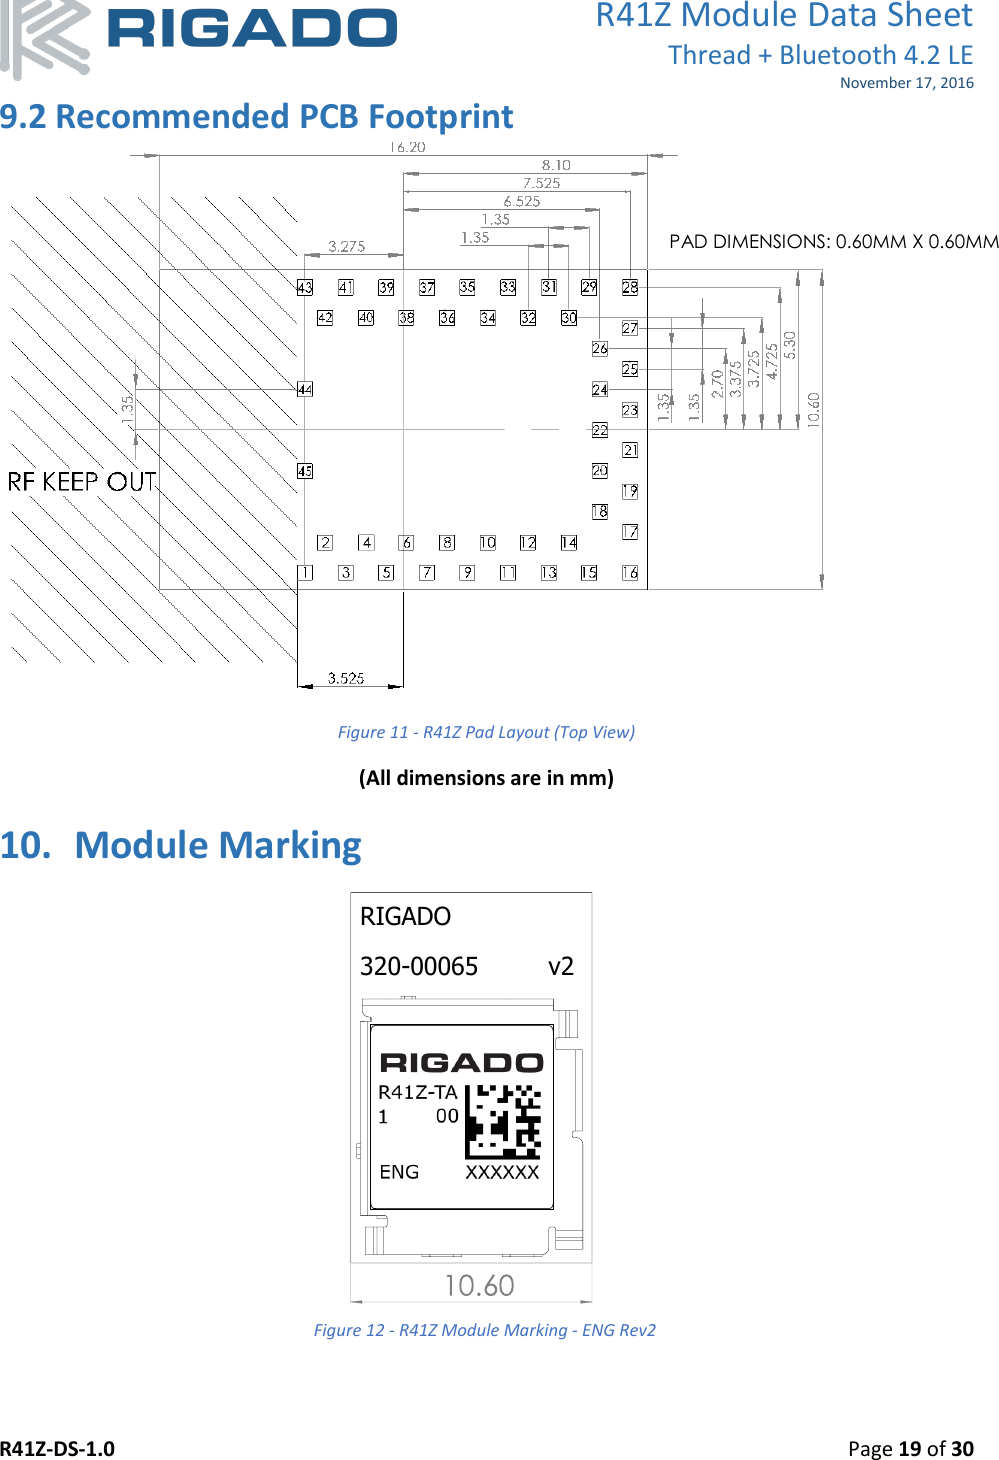 R41Z Module Data Sheet Thread + Bluetooth 4.2 LE November 17, 2016 R41Z-DS-1.0    Page 19 of 30  9.2 Recommended PCB Footprint  Figure 11 - R41Z Pad Layout (Top View) (All dimensions are in mm)  10. Module Marking    PAD DIMENSIONS: 0.60MM X 0.60MM RIGADO 320-00065         v2 Figure 12 - R41Z Module Marking - ENG Rev2 